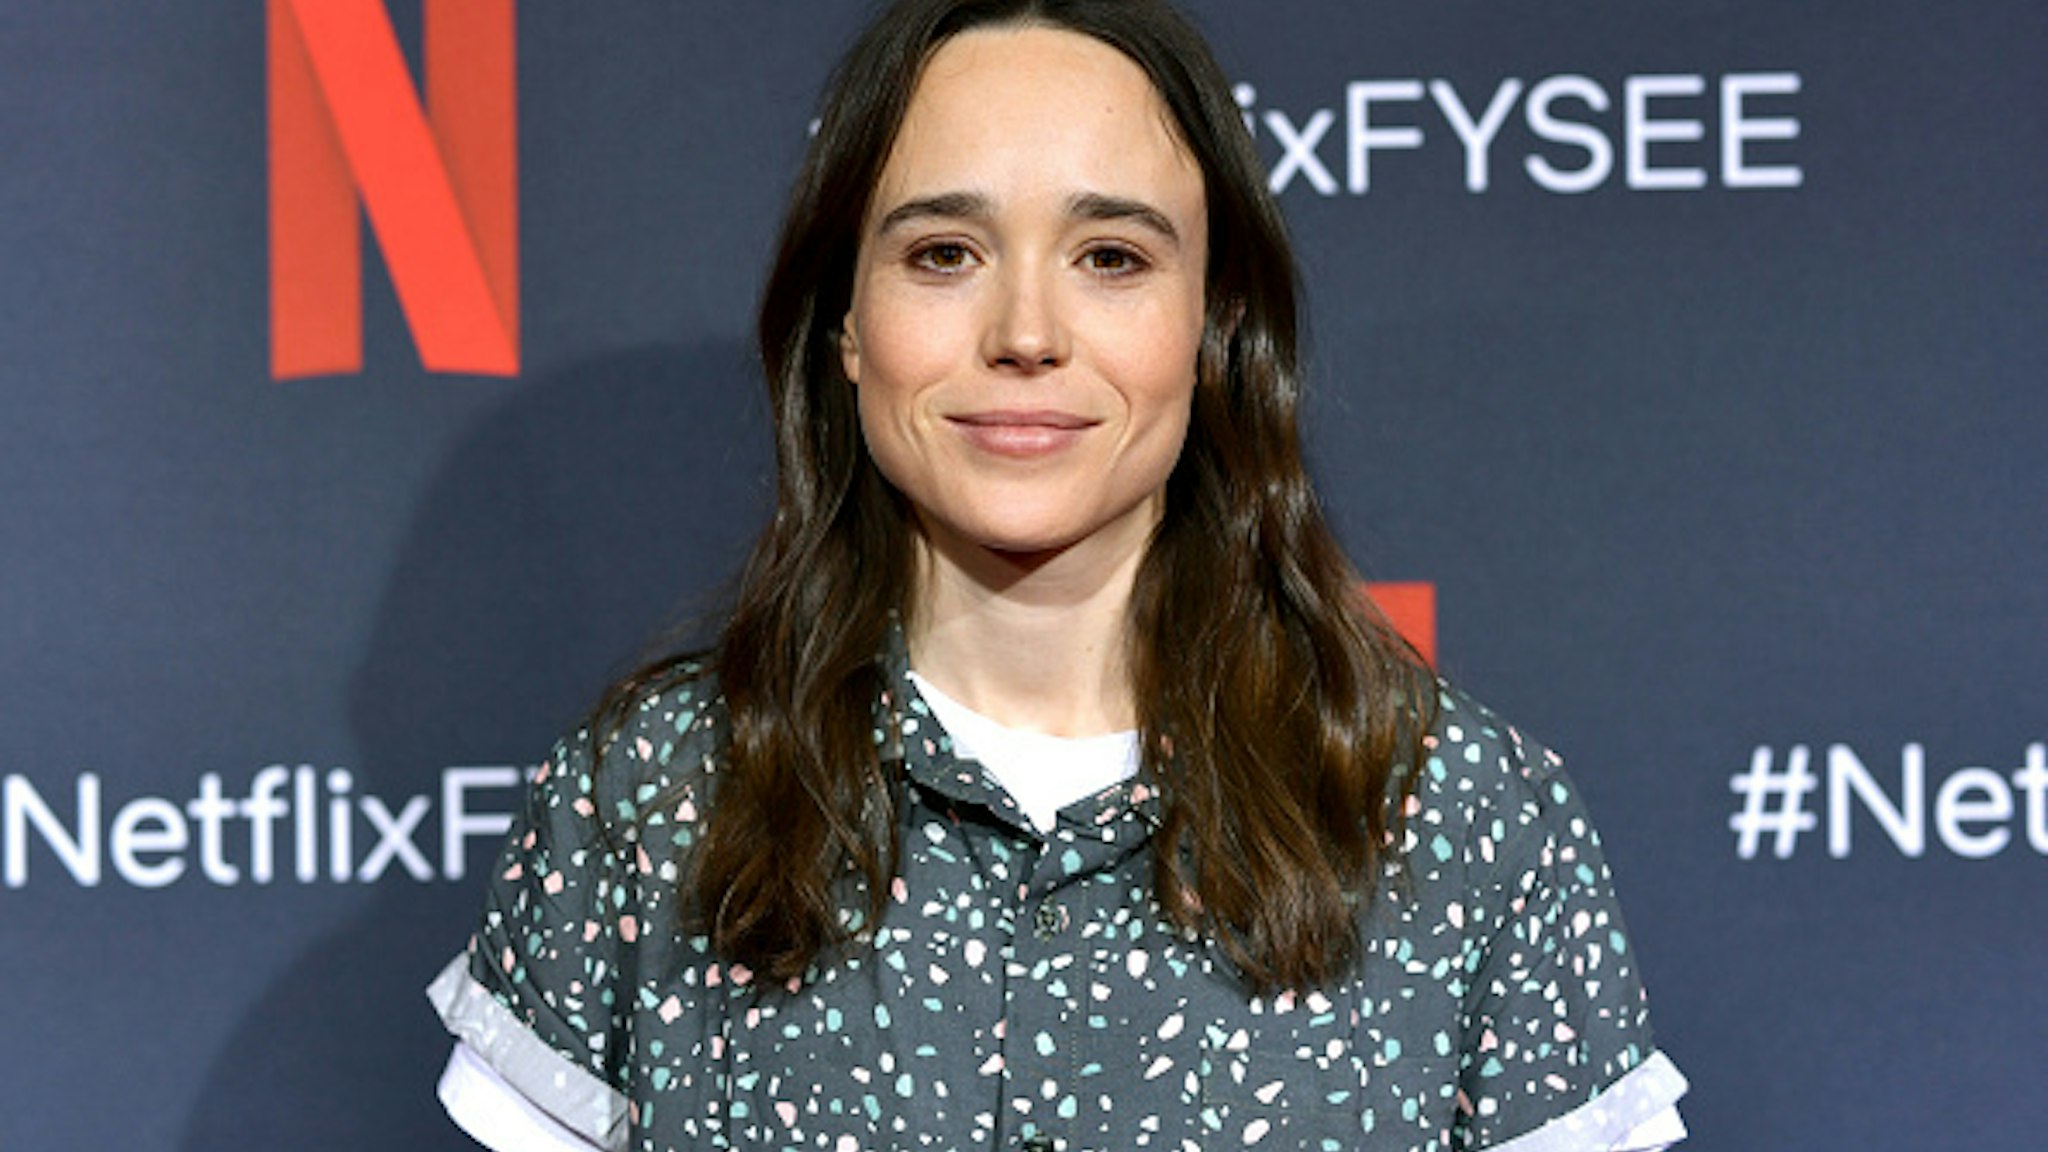 LOS ANGELES, CALIFORNIA - MAY 11: Ellen Page attends Netflix's 'Umbrella Academy' Screening at Raleigh Studios on May 11, 2019 in Los Angeles, California.